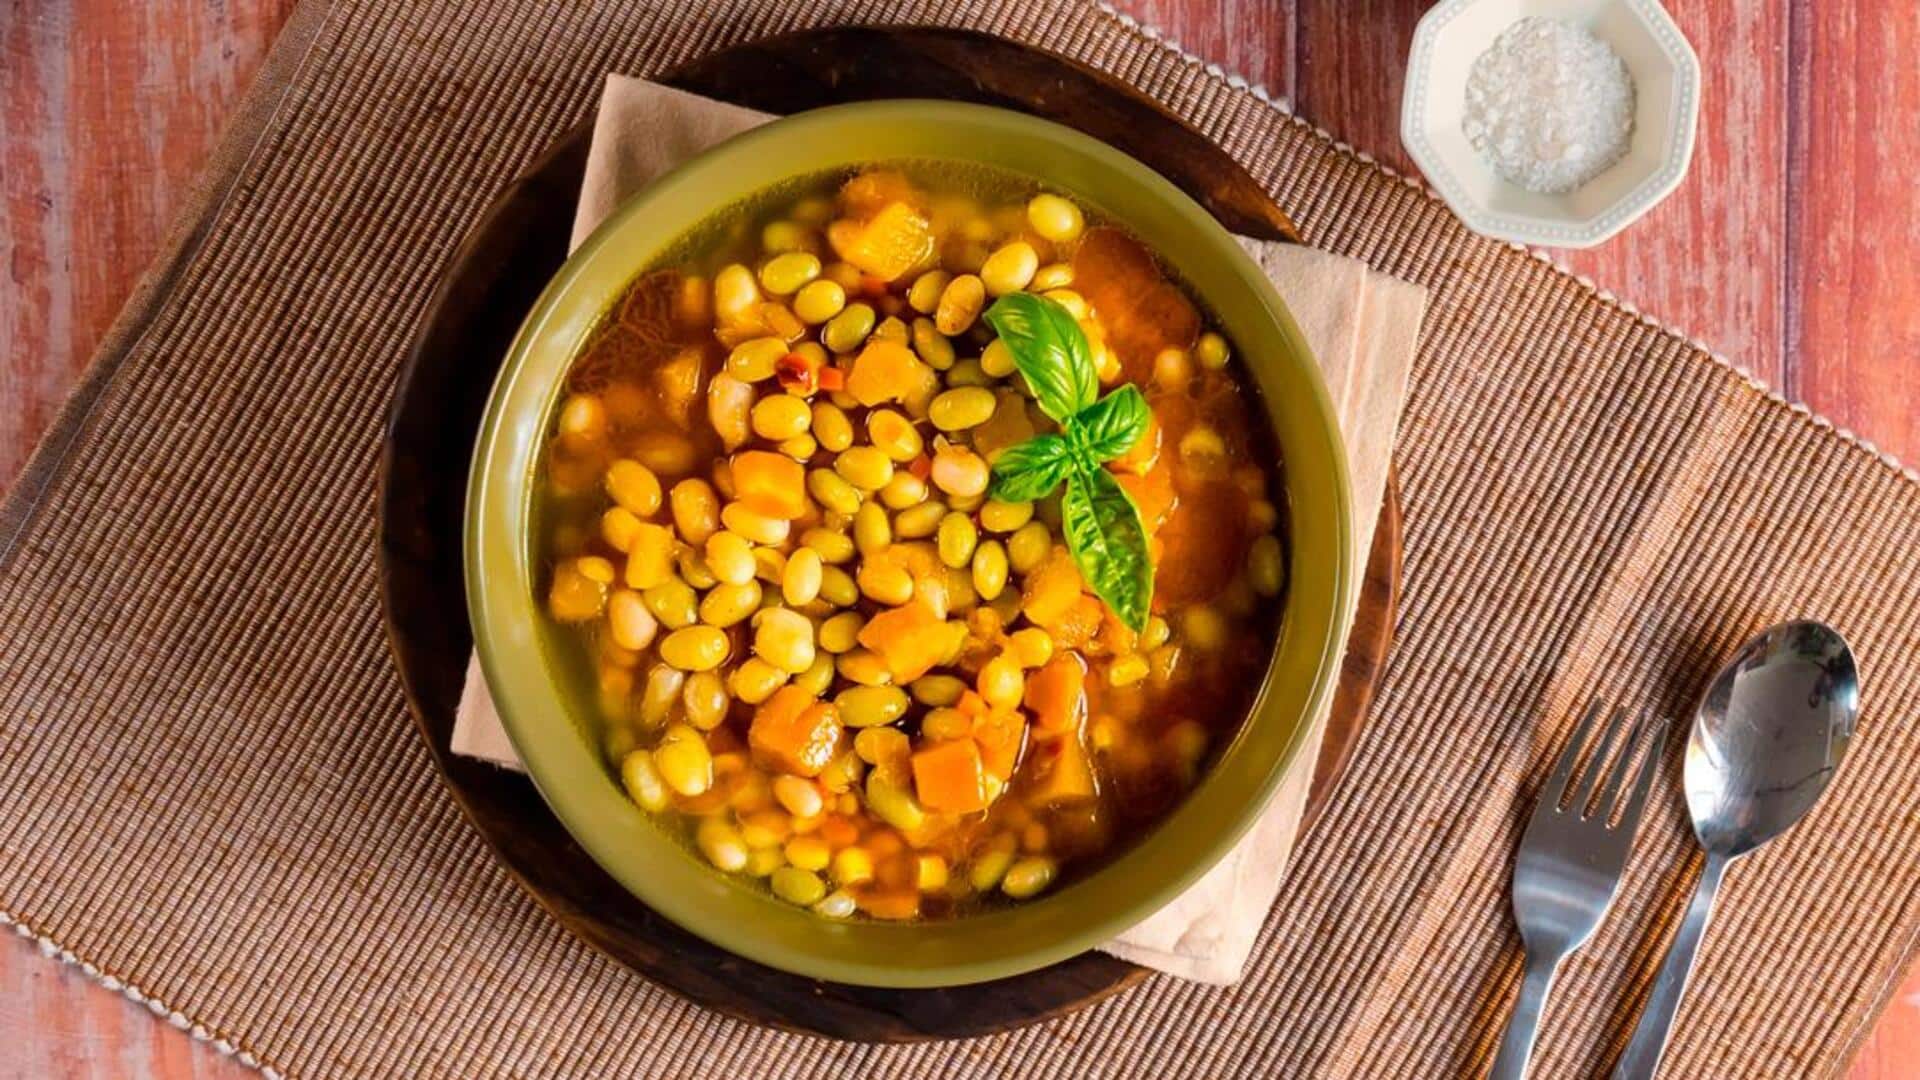 Chile on your plate: Try this Chilean porotos granados recipe